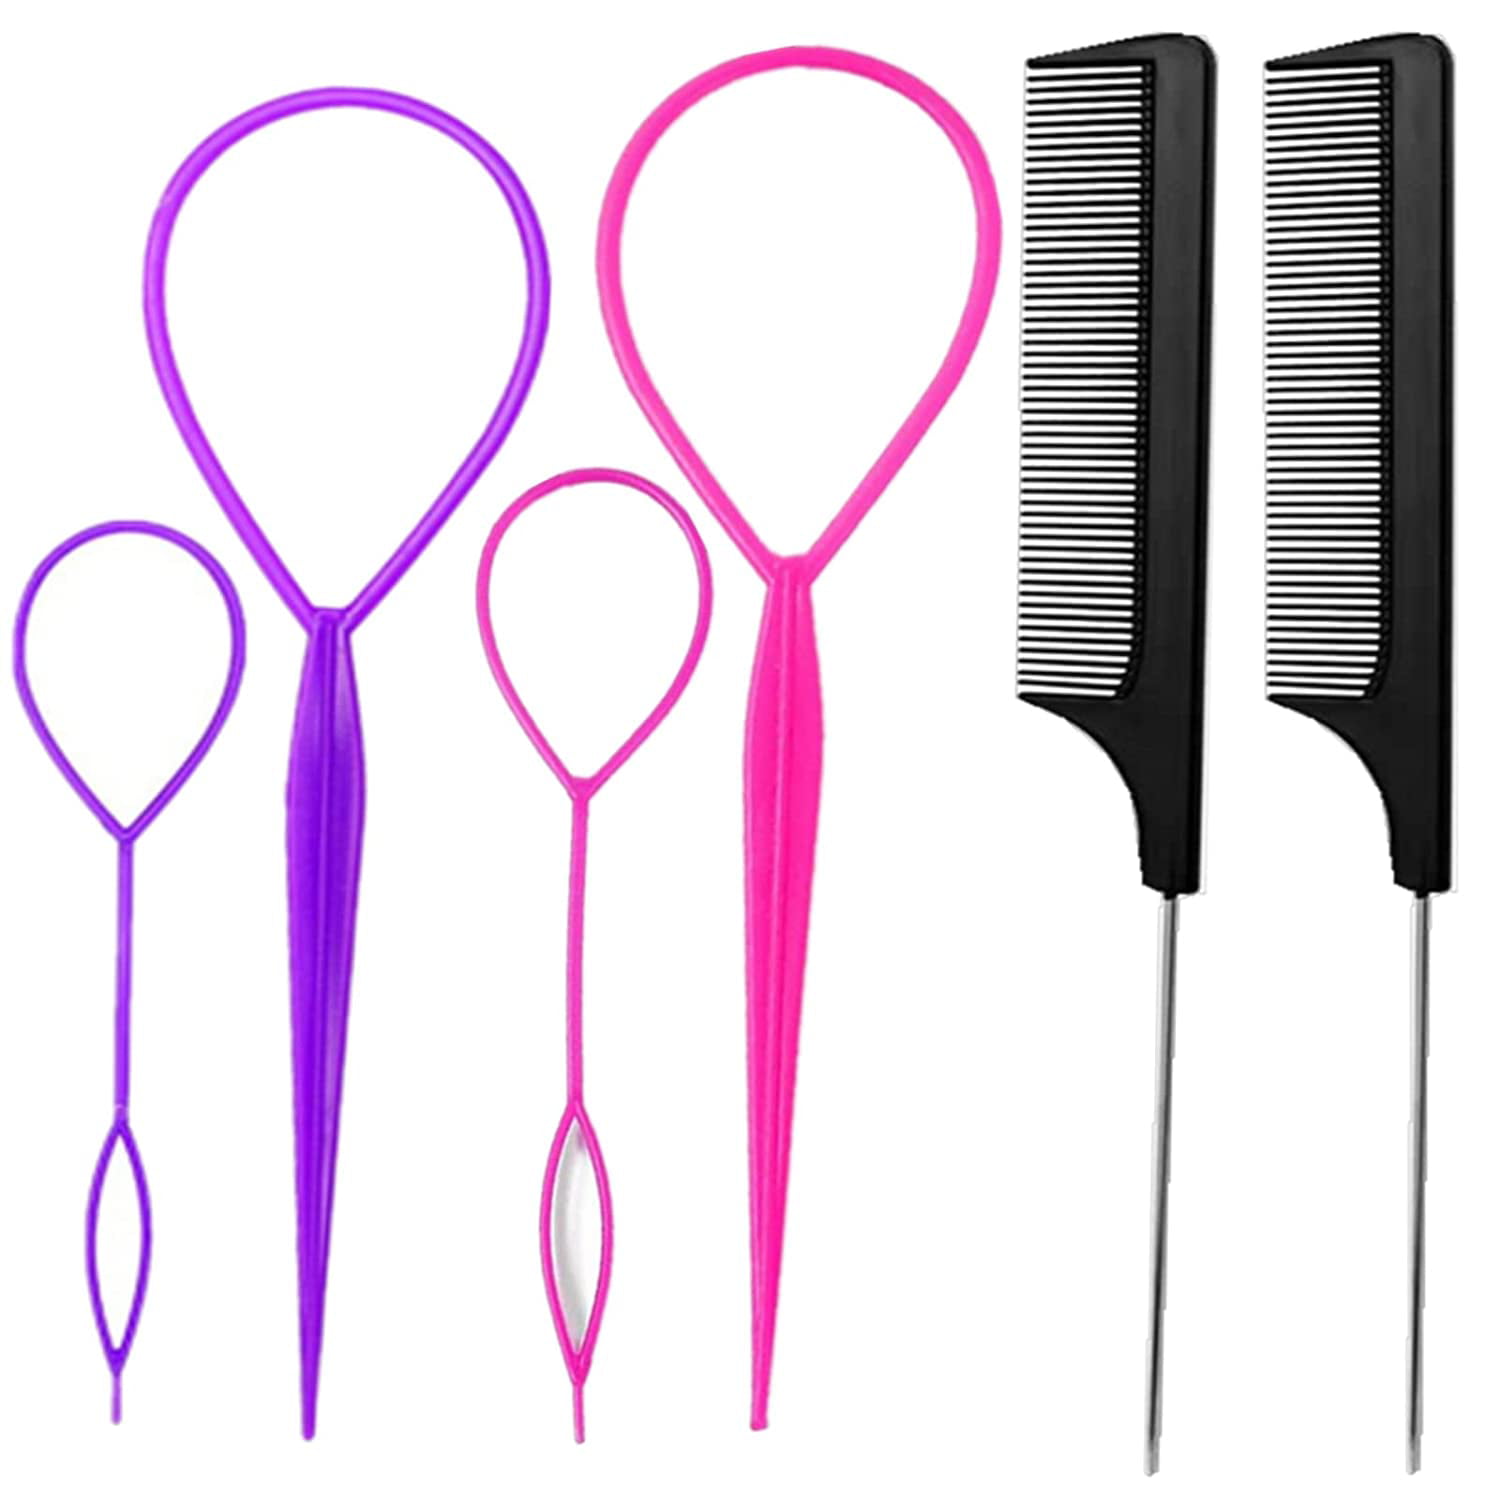 Topsy Tail Hair Tool,Hair Loop Styling French Braid Pull Through Beader Tool Braiding Comb for Parting Rat Tail Combs Tools for Girls Supplies(1set)